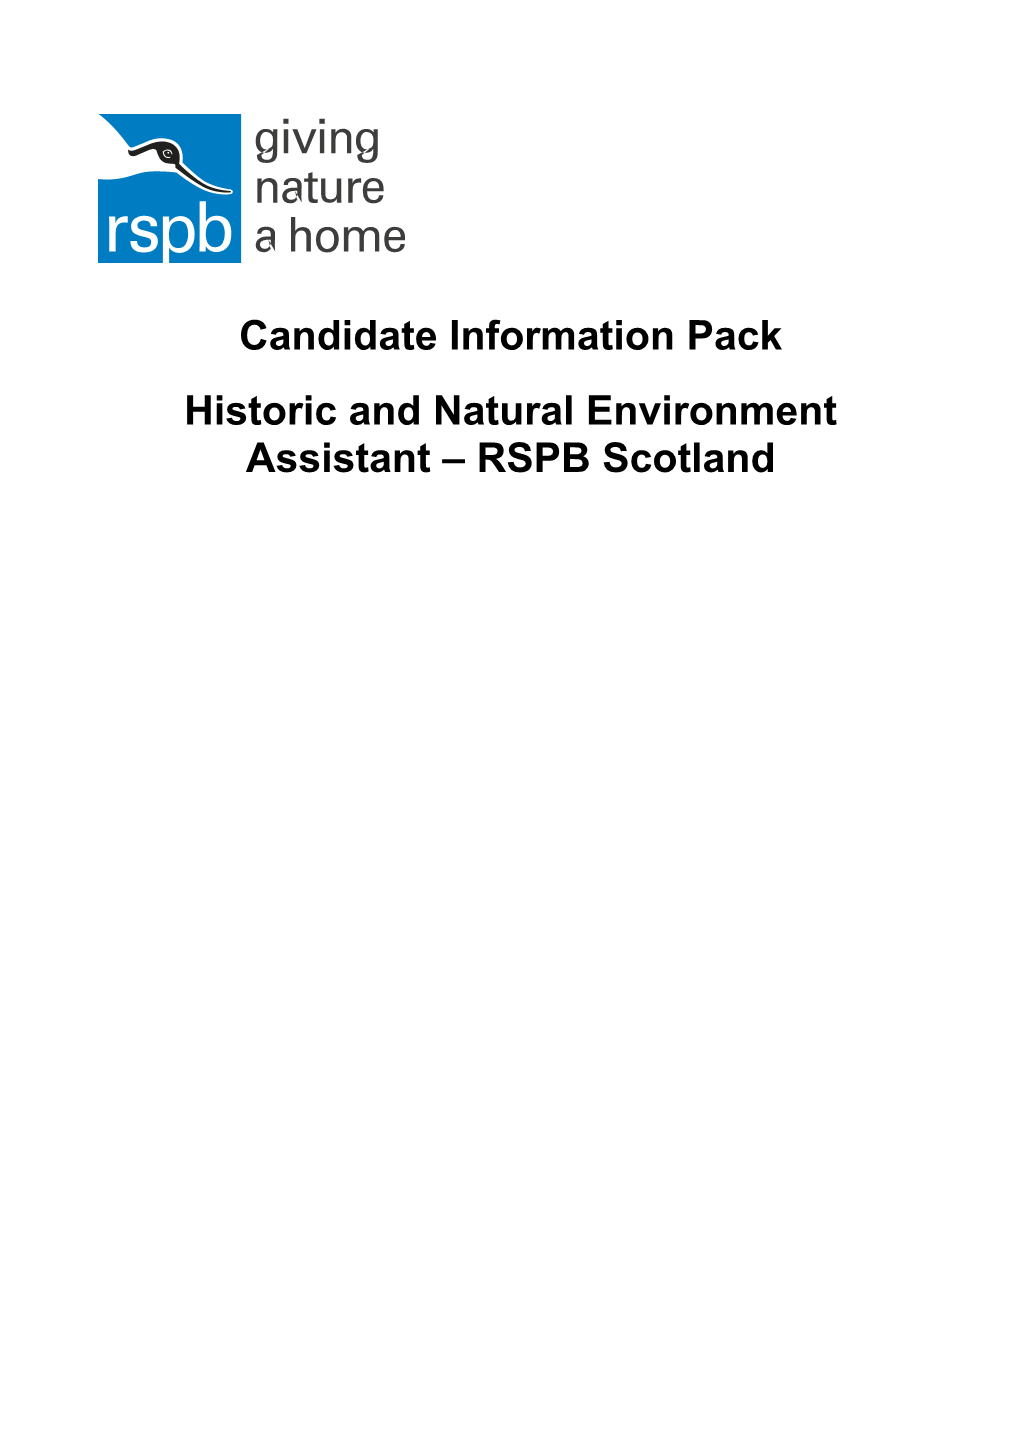 Historic and Natural Environment Assistant RSPB Scotland